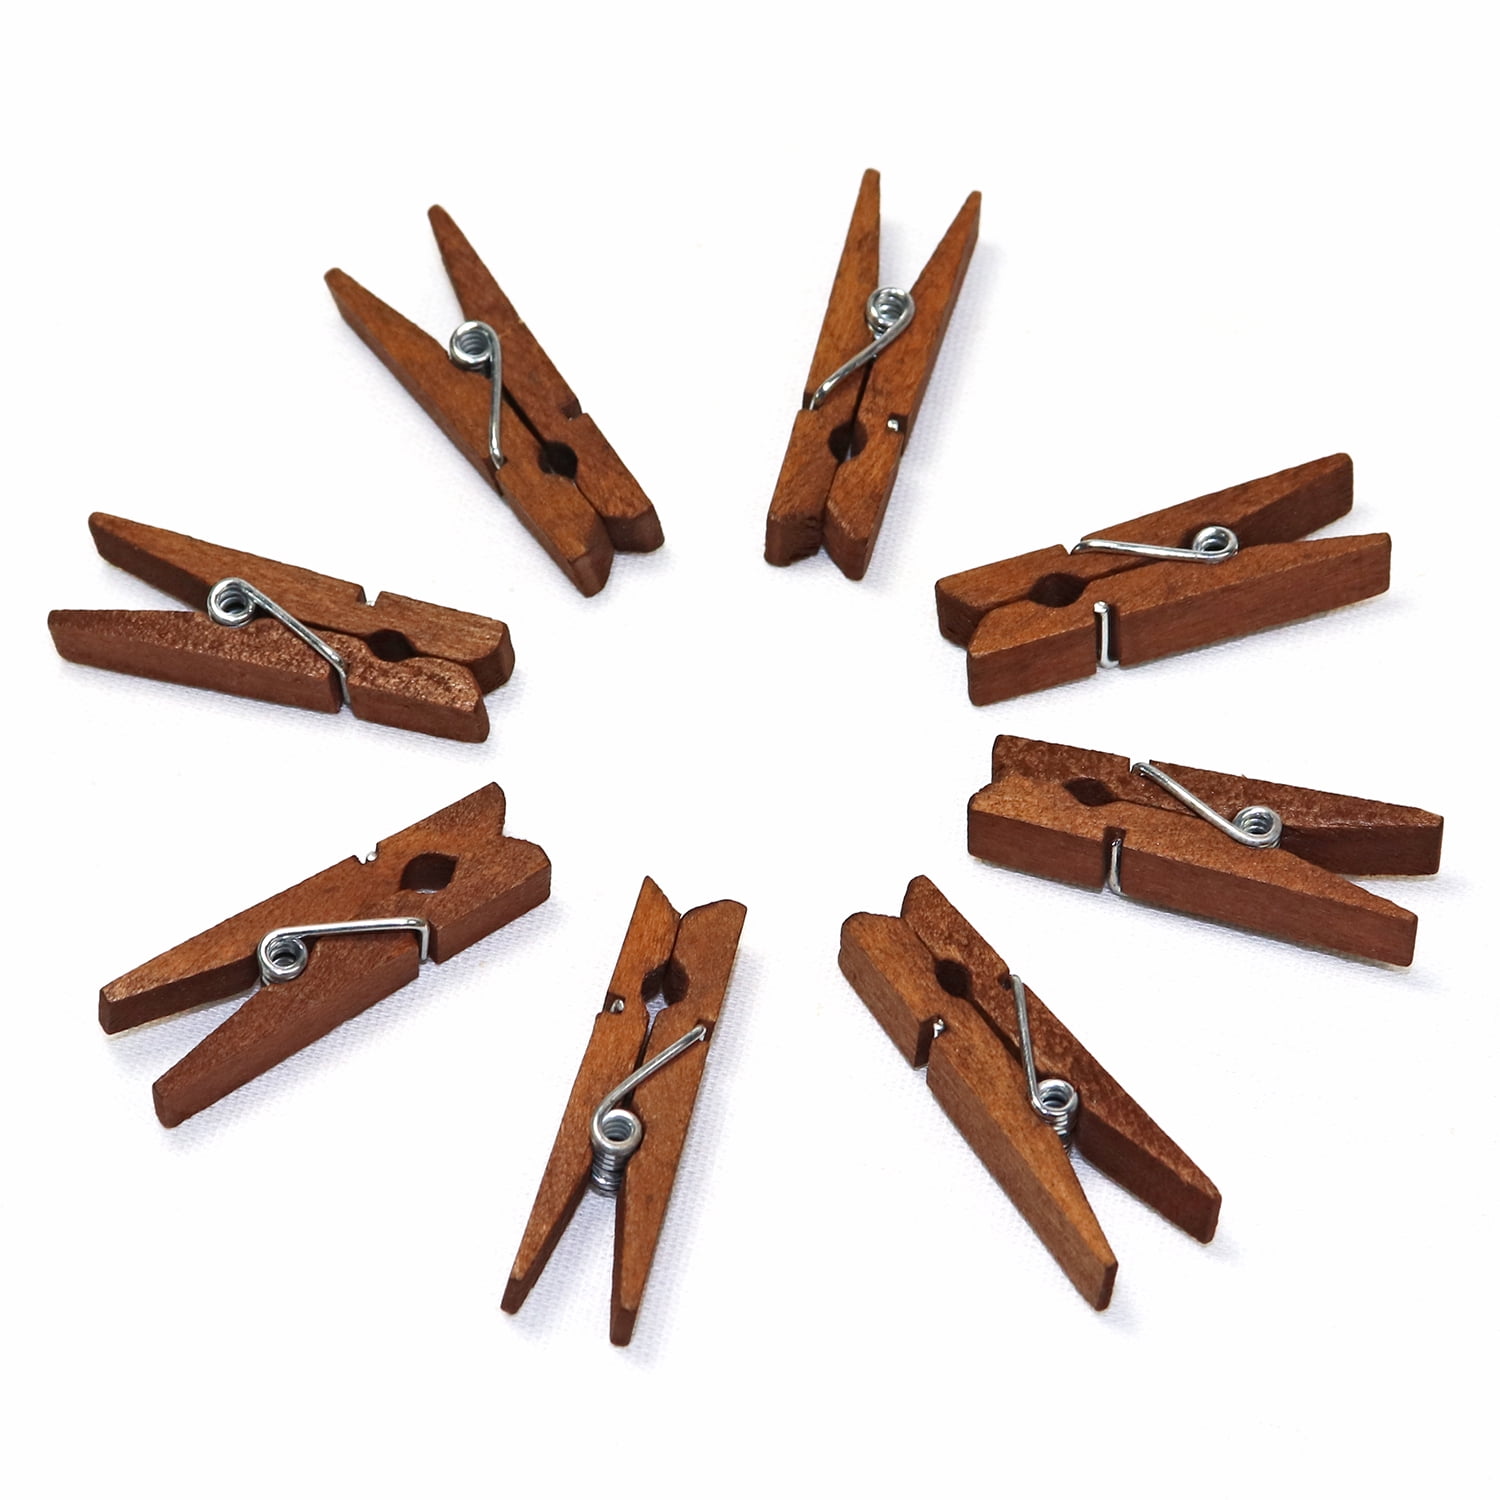 DurReus 50pcs Small Wooden Clothespins for Pictures with Jute Twine Miniature Clothes Pins for Crafts Decor Drying Clothing Peg Natural Wood Shirt Clips